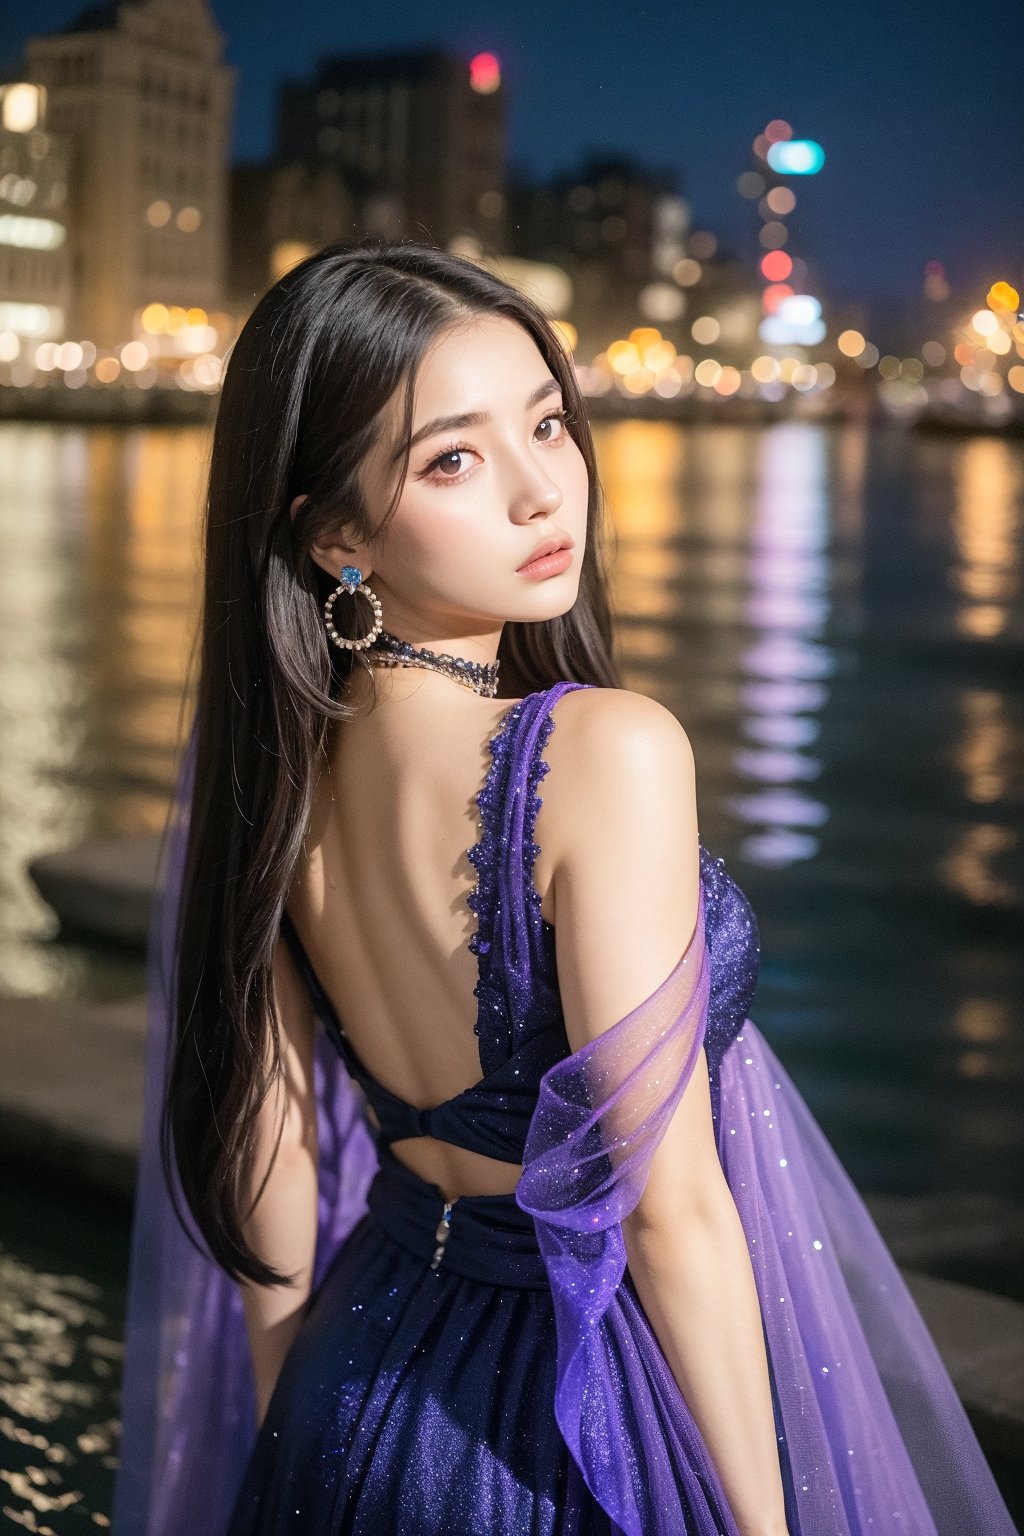 A stunning masterpiece unfolds under the veil of night. The city's neon lights reflected on the river's surface create a canvas of blue and purple hues. A beautiful girl with raven-black locks styled back, her porcelain skin aglow in the soft glow. A delicate necklace adorns her slender neck, while earrings glint like stars. She wears a mesmerizing dark-purple one-shoulder dress that seems to shimmer in harmony with the city's pulse. Framed by the riverbank, she poses with an air of confidence and mystery, as if beckoning us into her world.